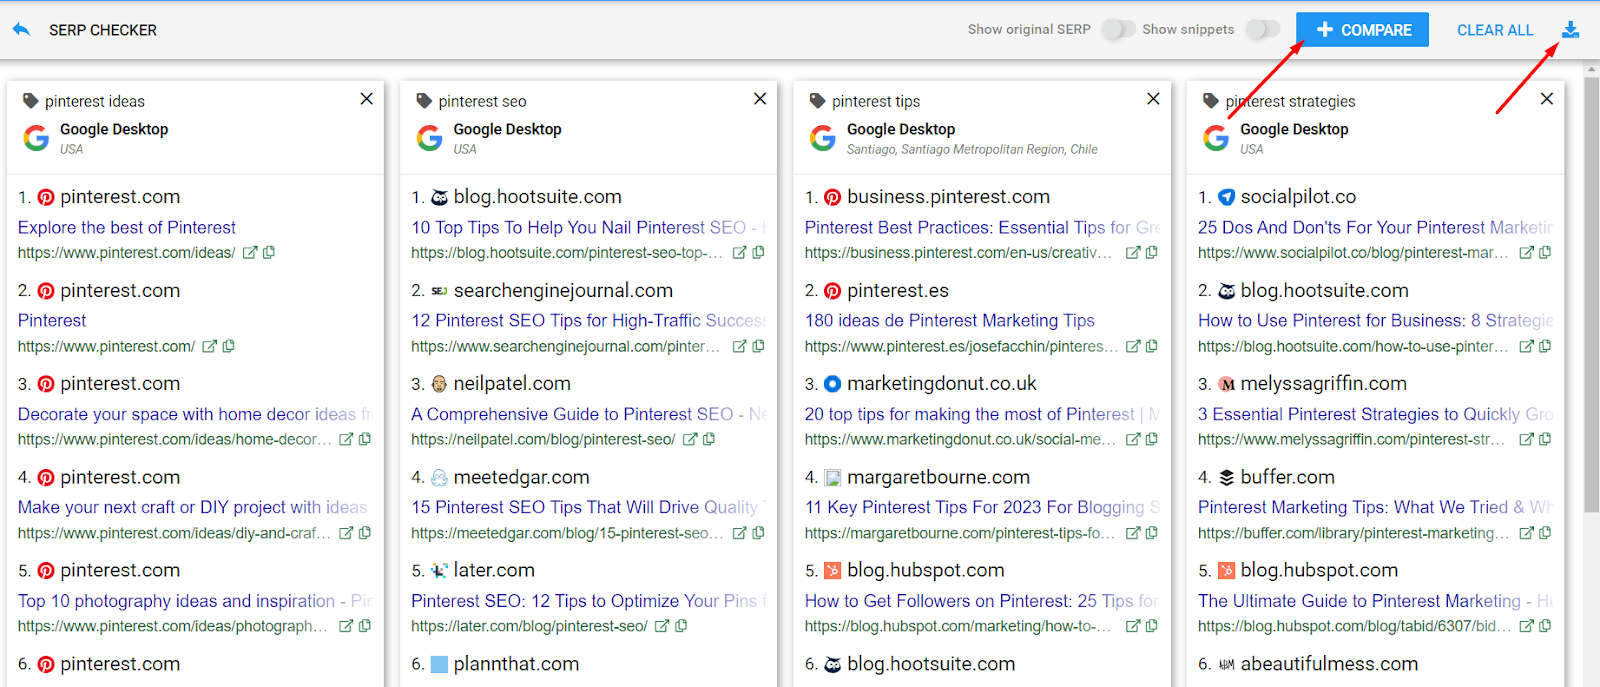 Serp snippets compare